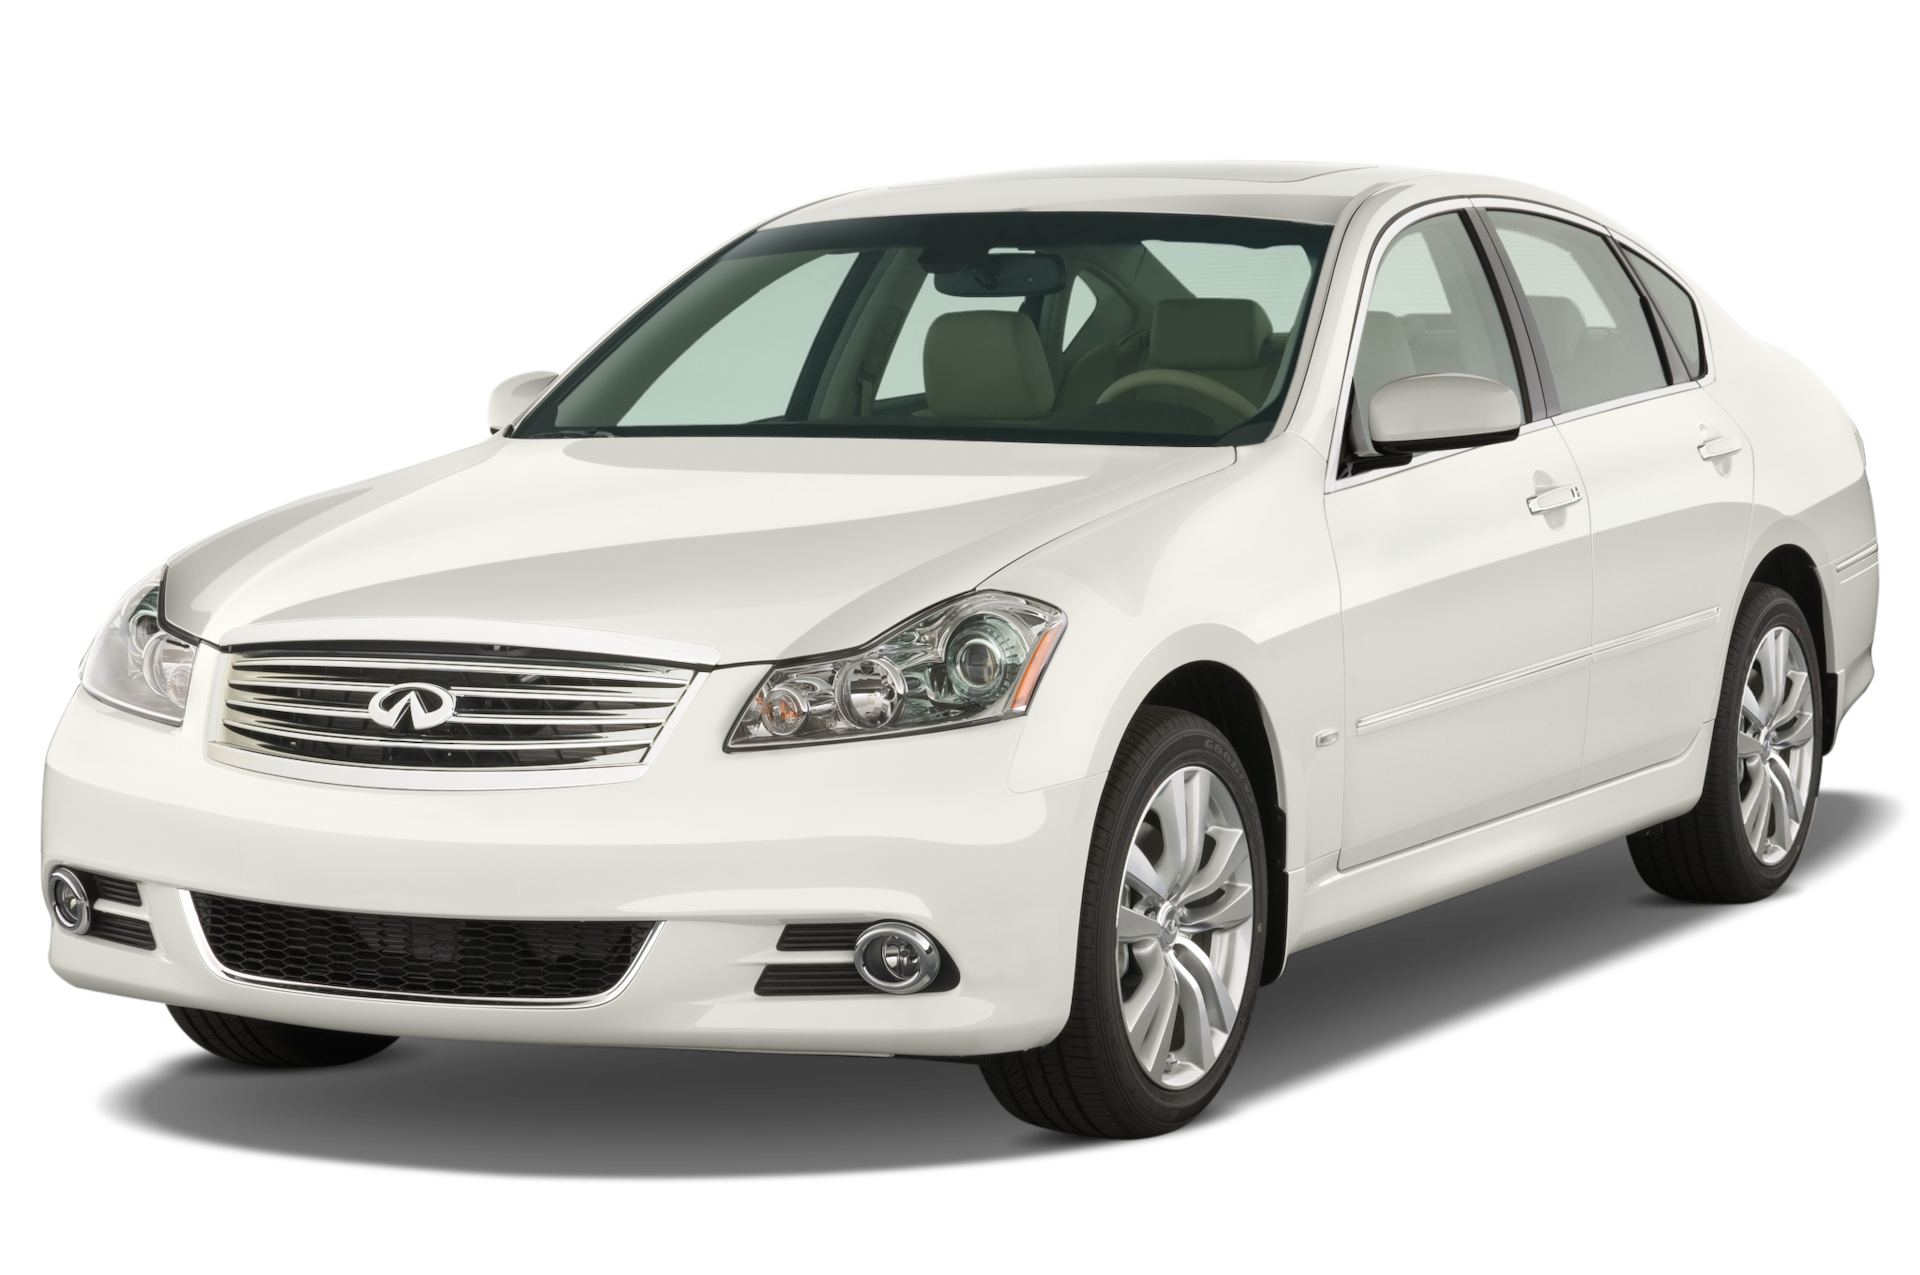 2010 Infiniti M45 Prices, Reviews, and Photos - MotorTrend